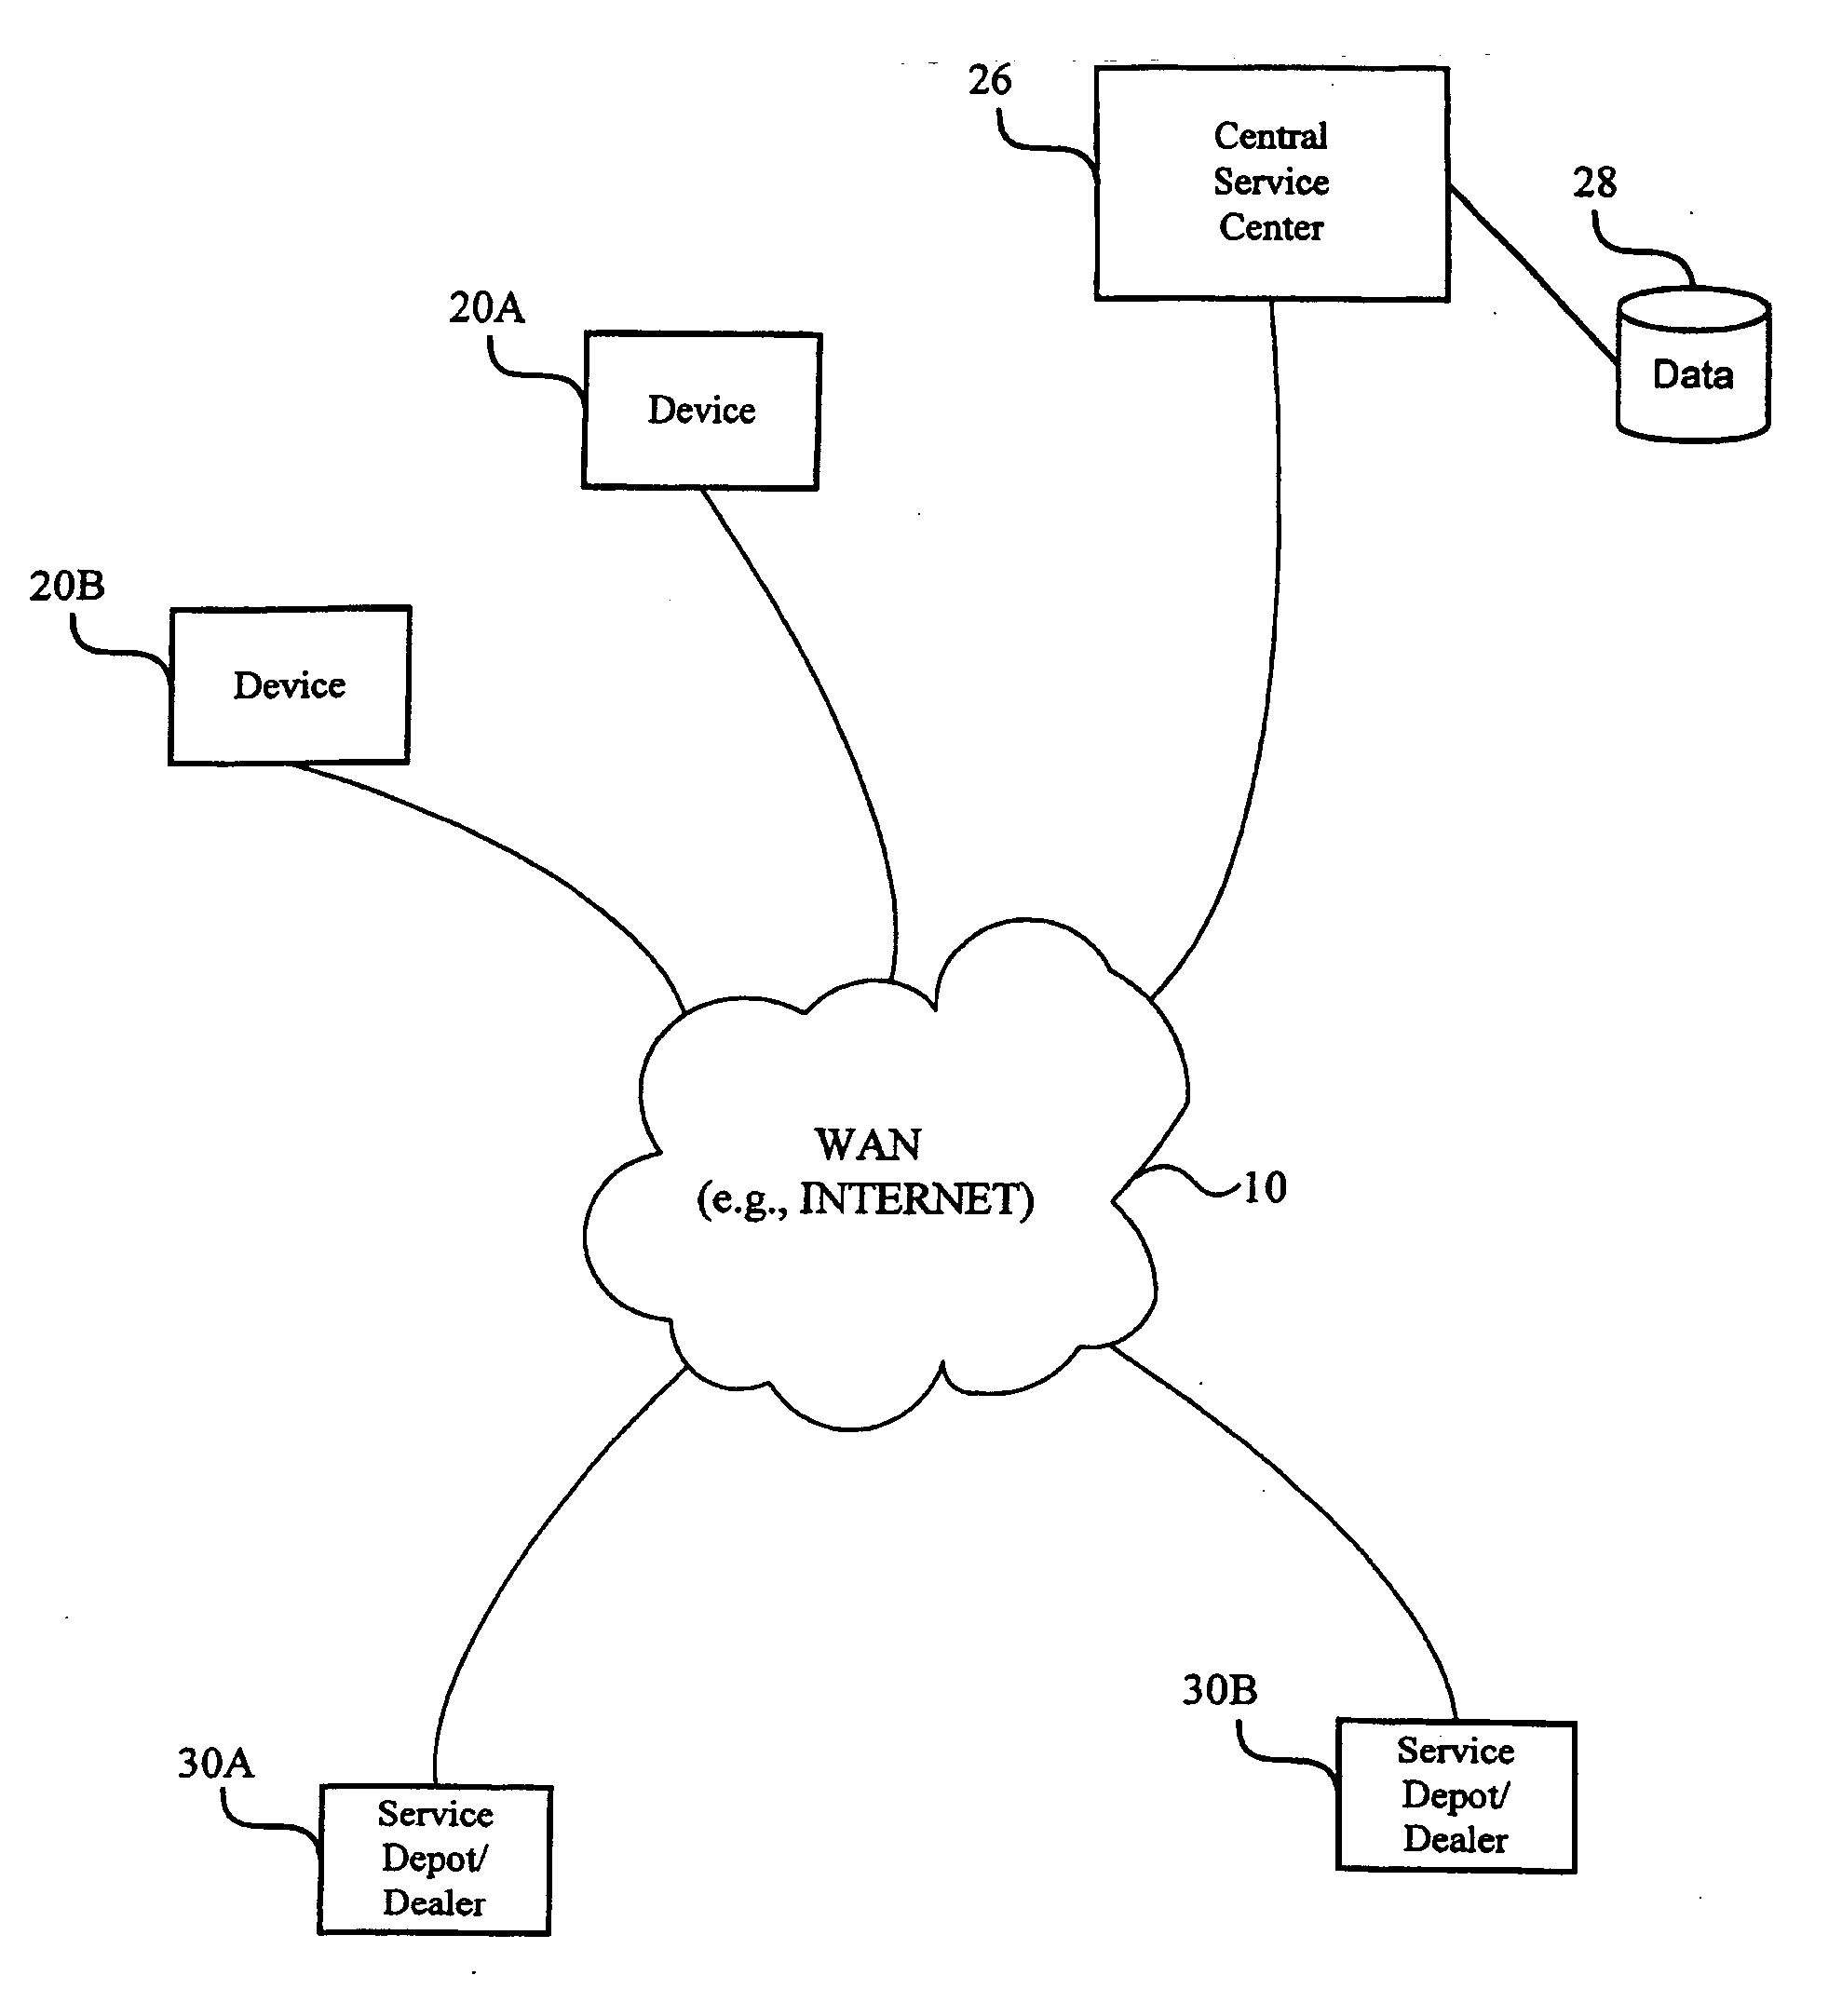 Method and system for diagnosing, collecting information and servicing a remote system